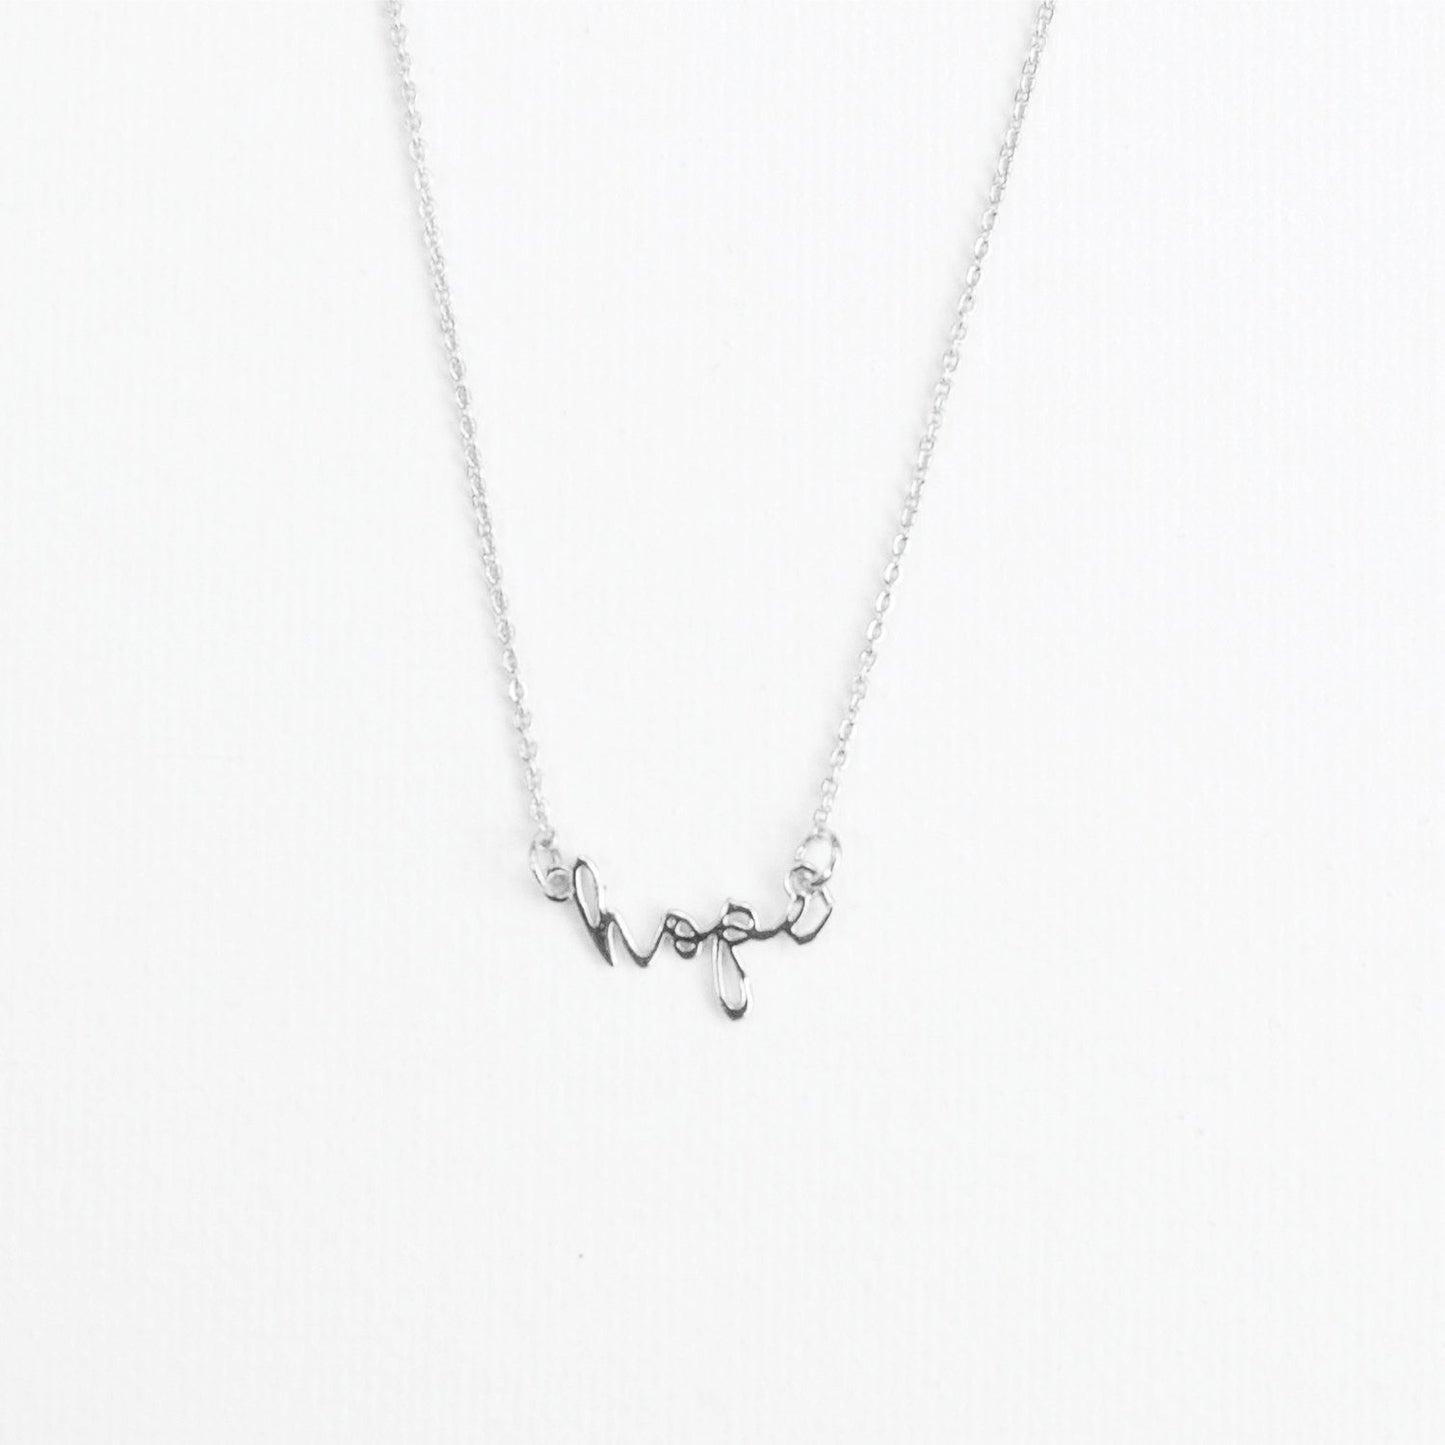 Luxe Inspirational Necklaces - Silver